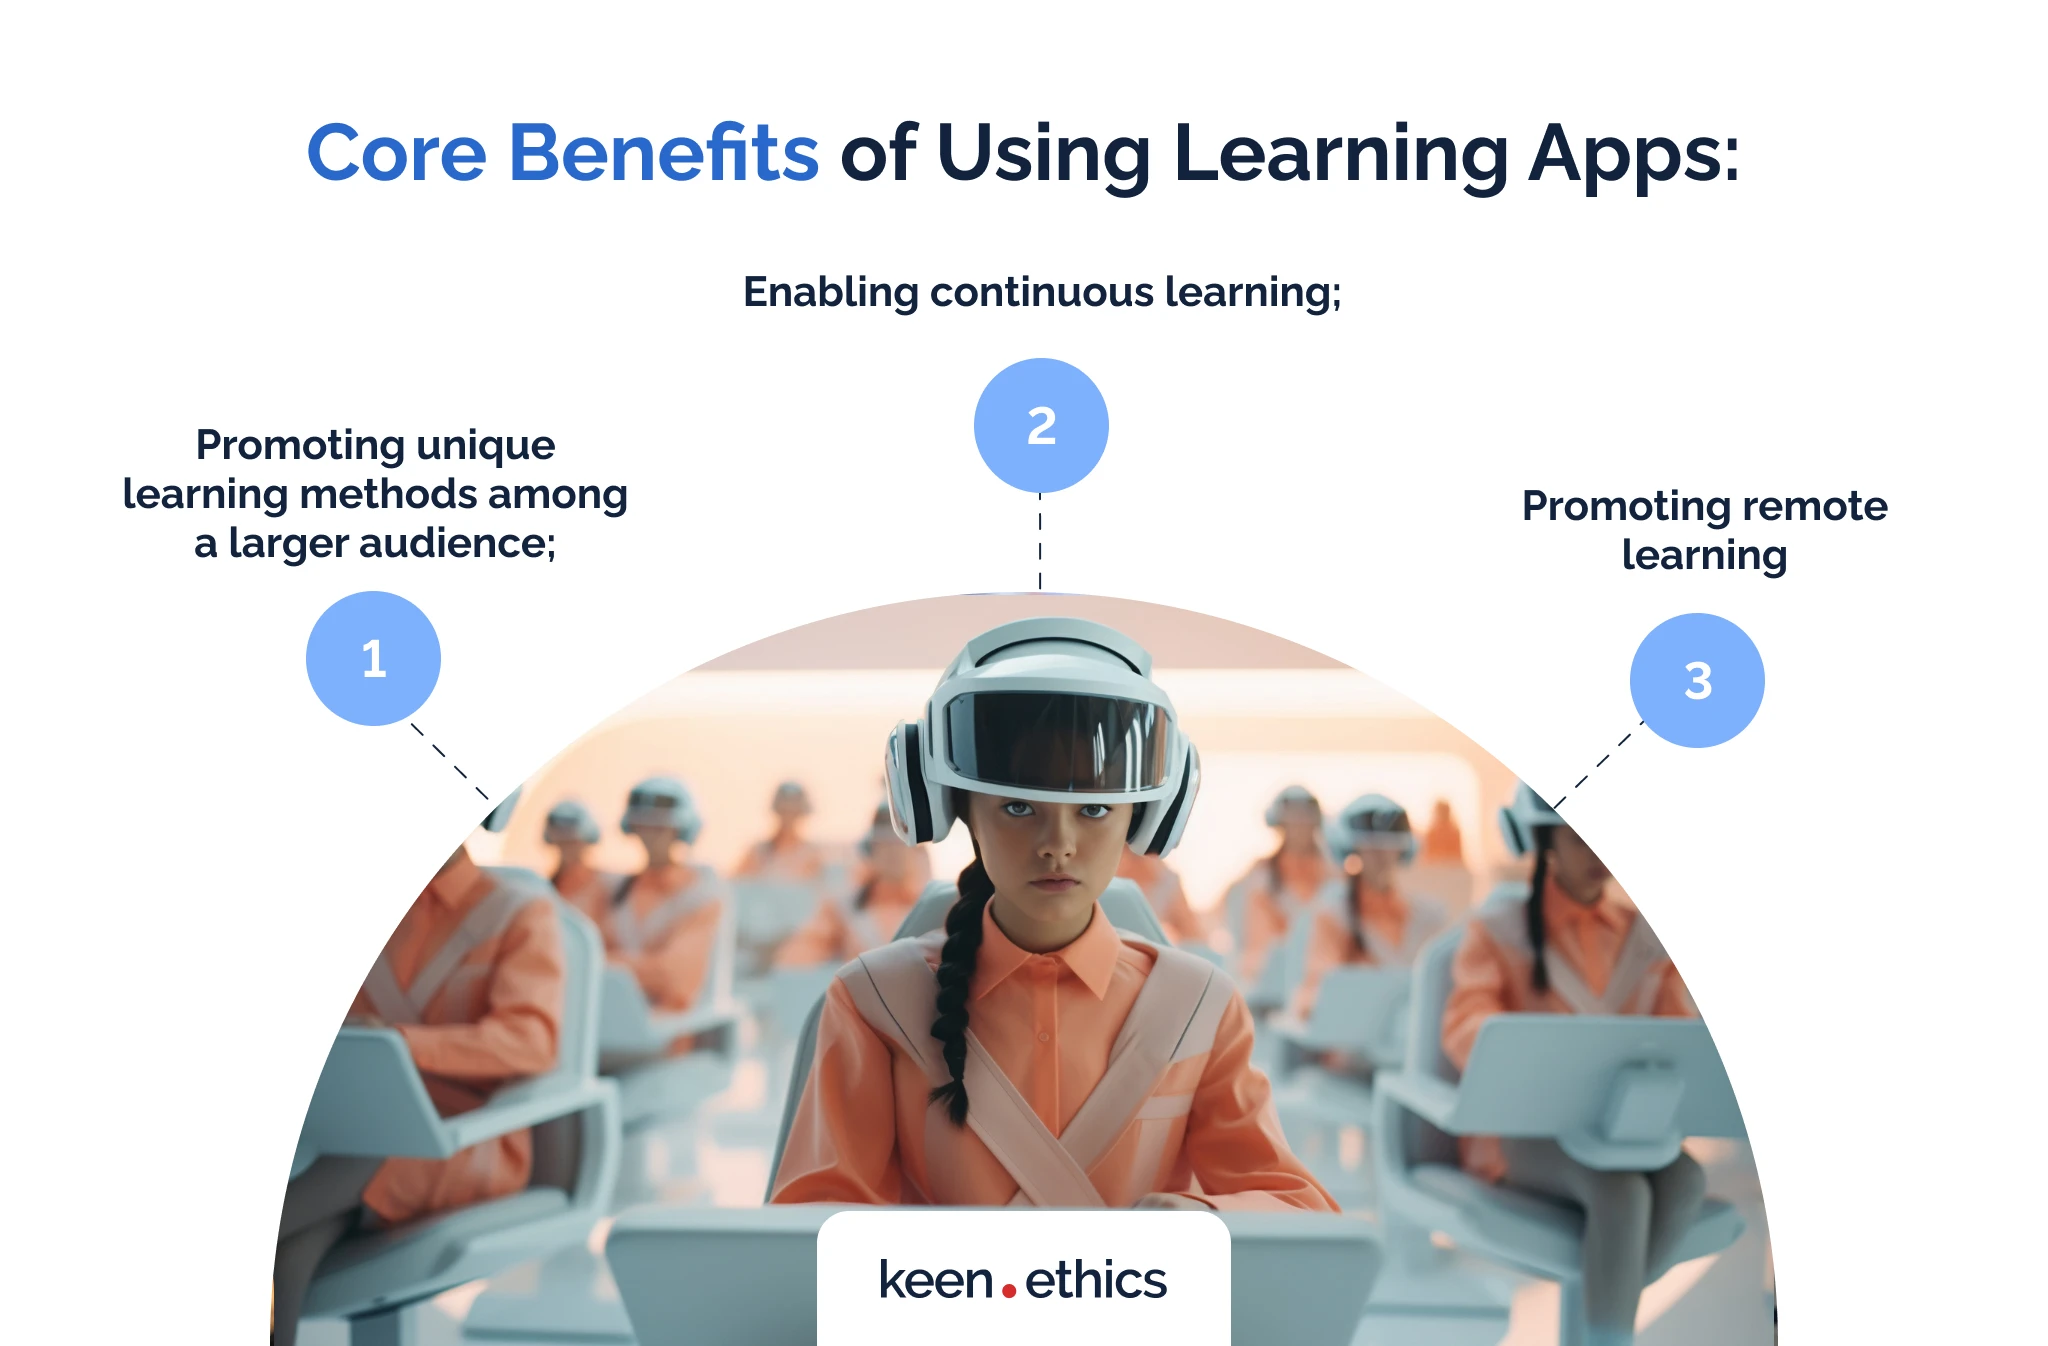 Core benefits of using learning apps